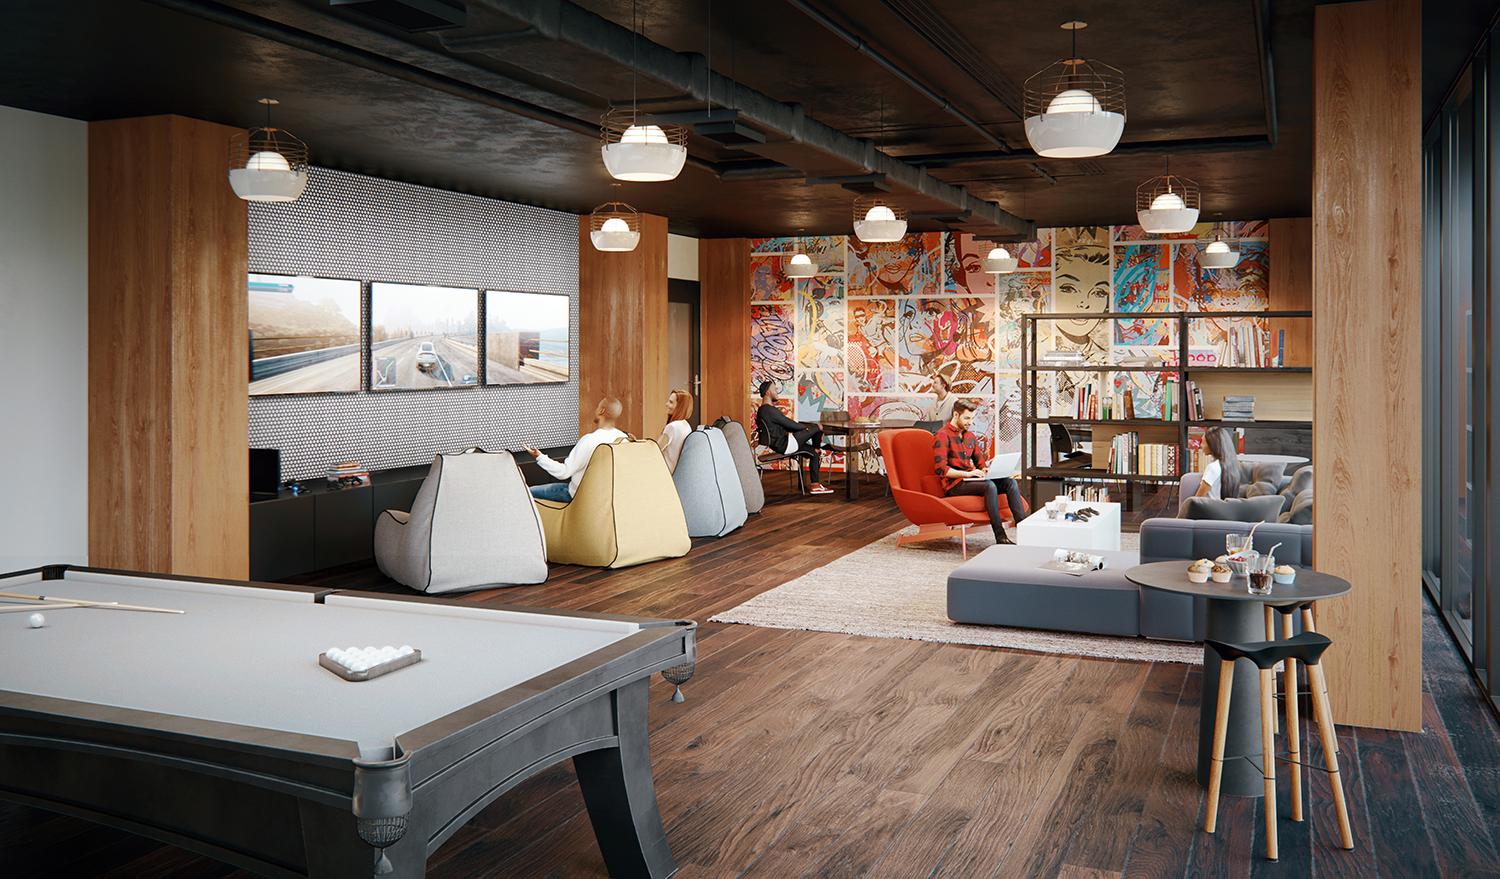 rendering of a games room in 700 Bay, showing colourful pop art wall, pool table, and comfy lounge chairs in front of video game screens